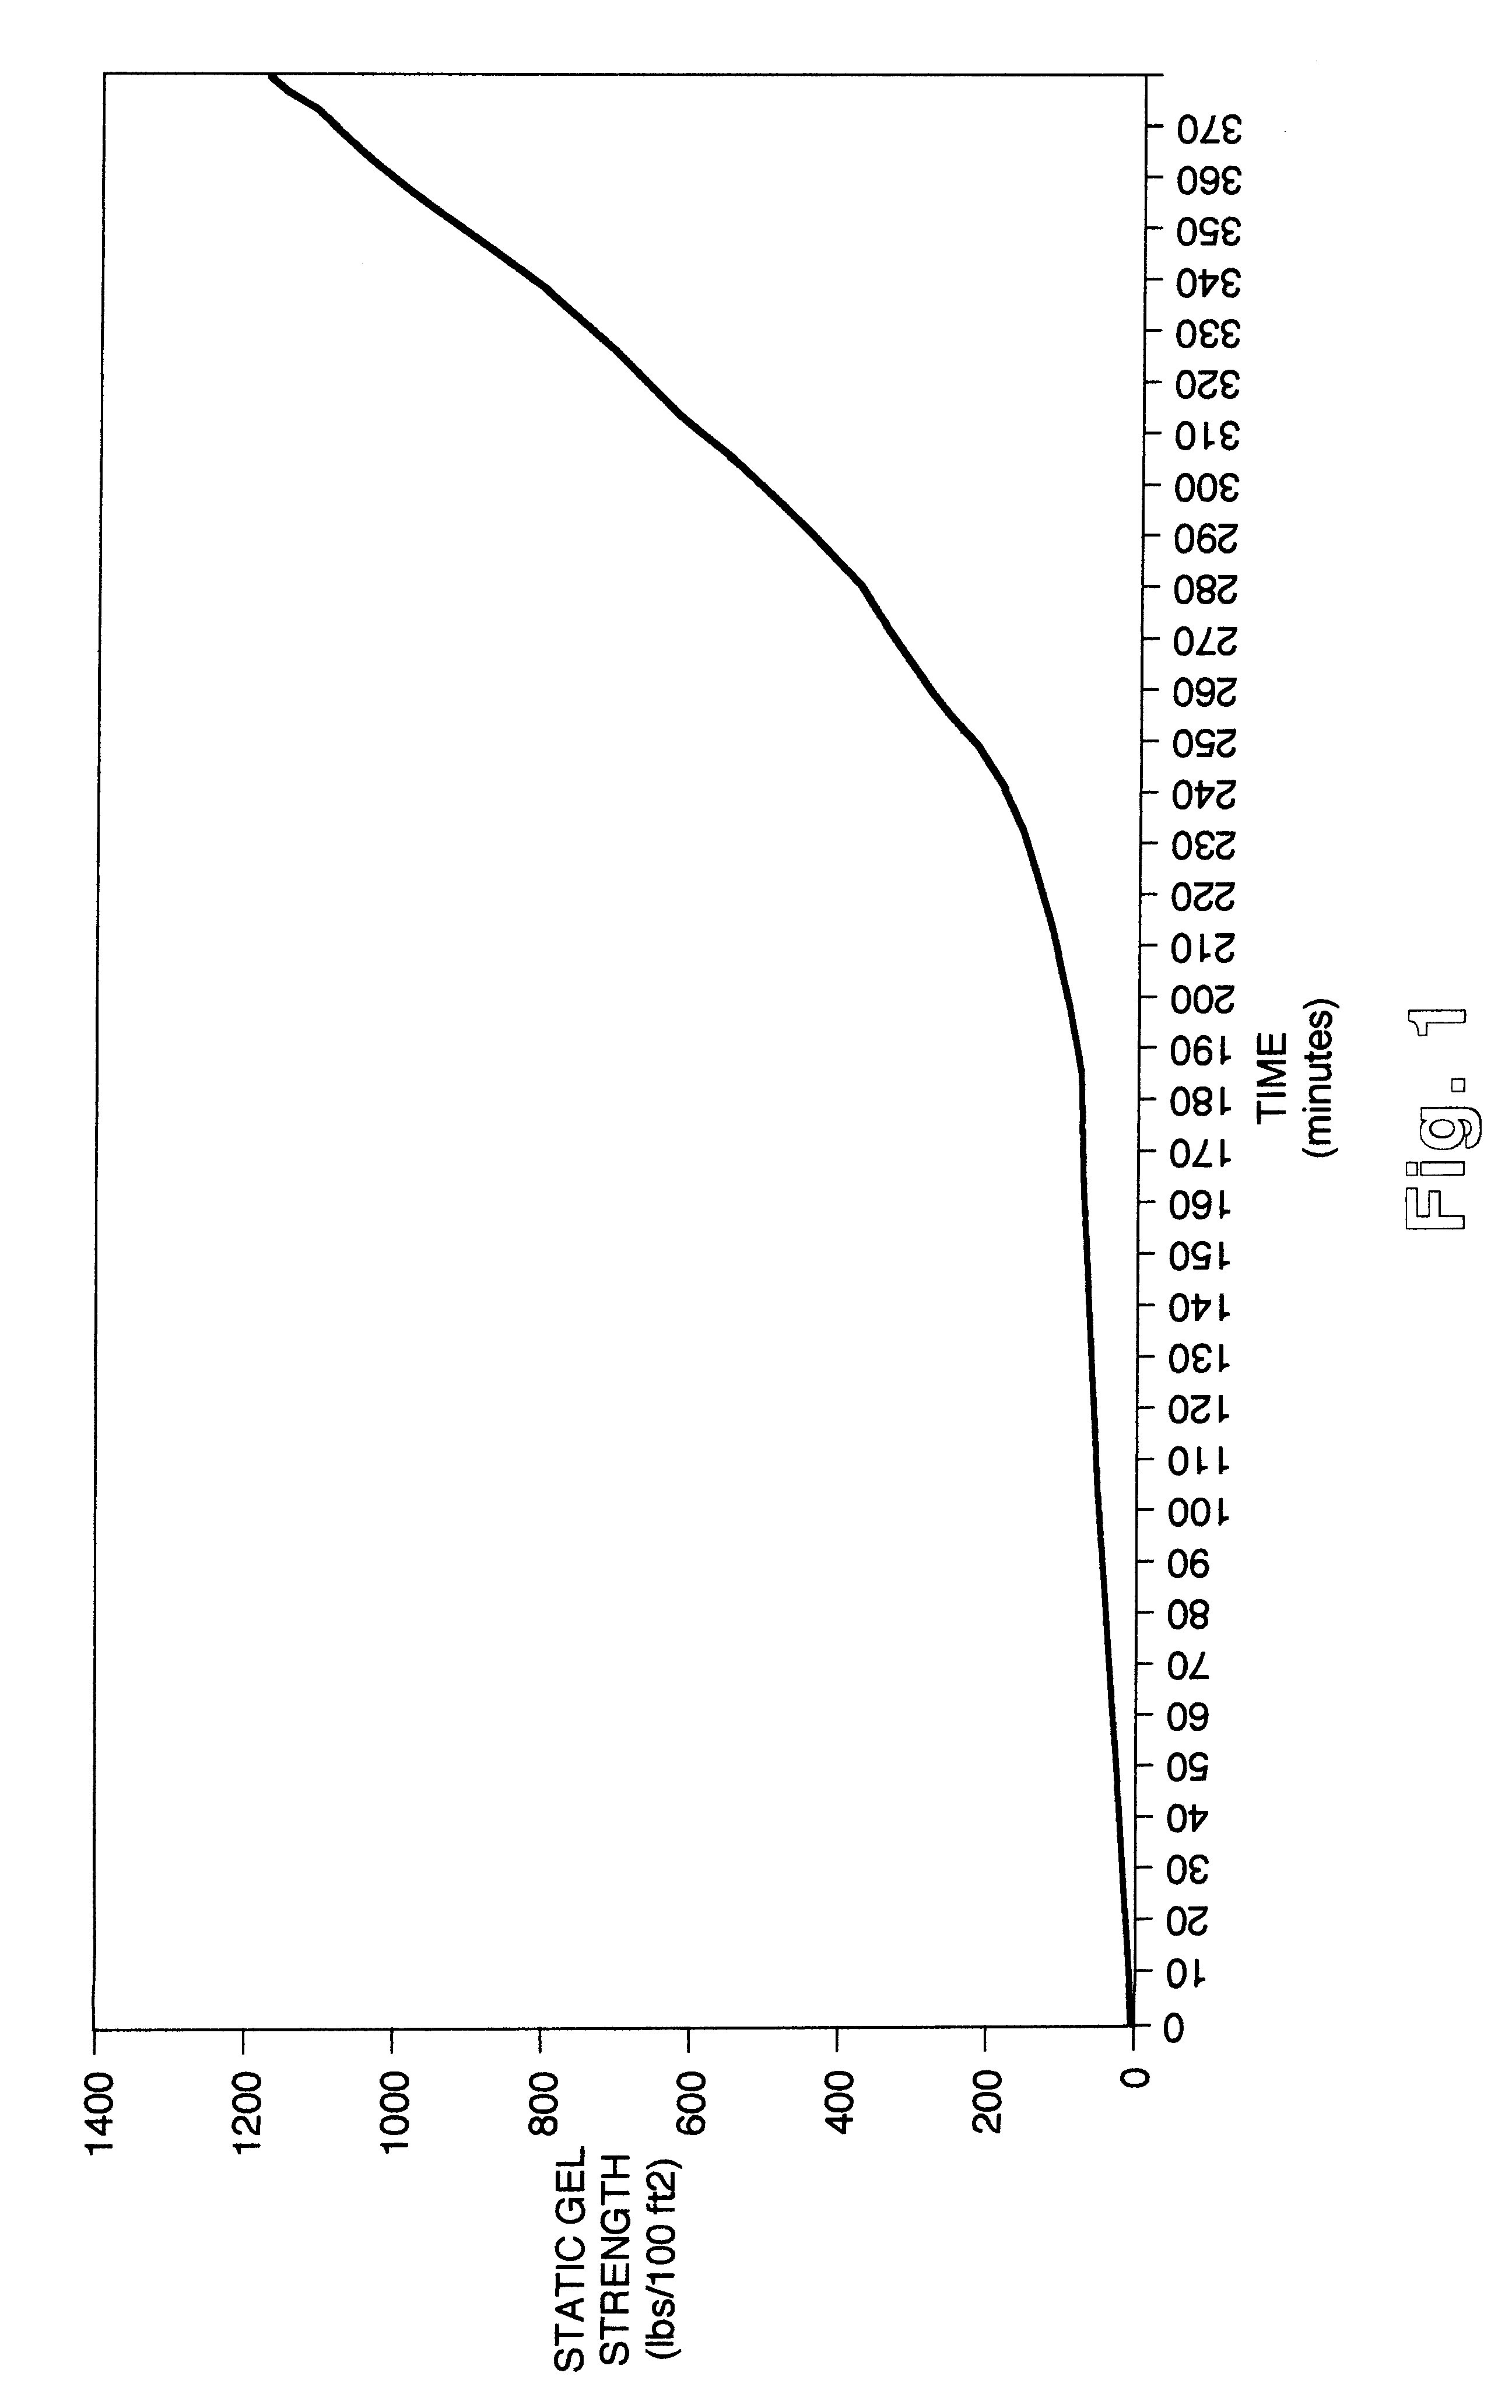 Cementing compositions, a method of making therefor, and a method for cementing wells